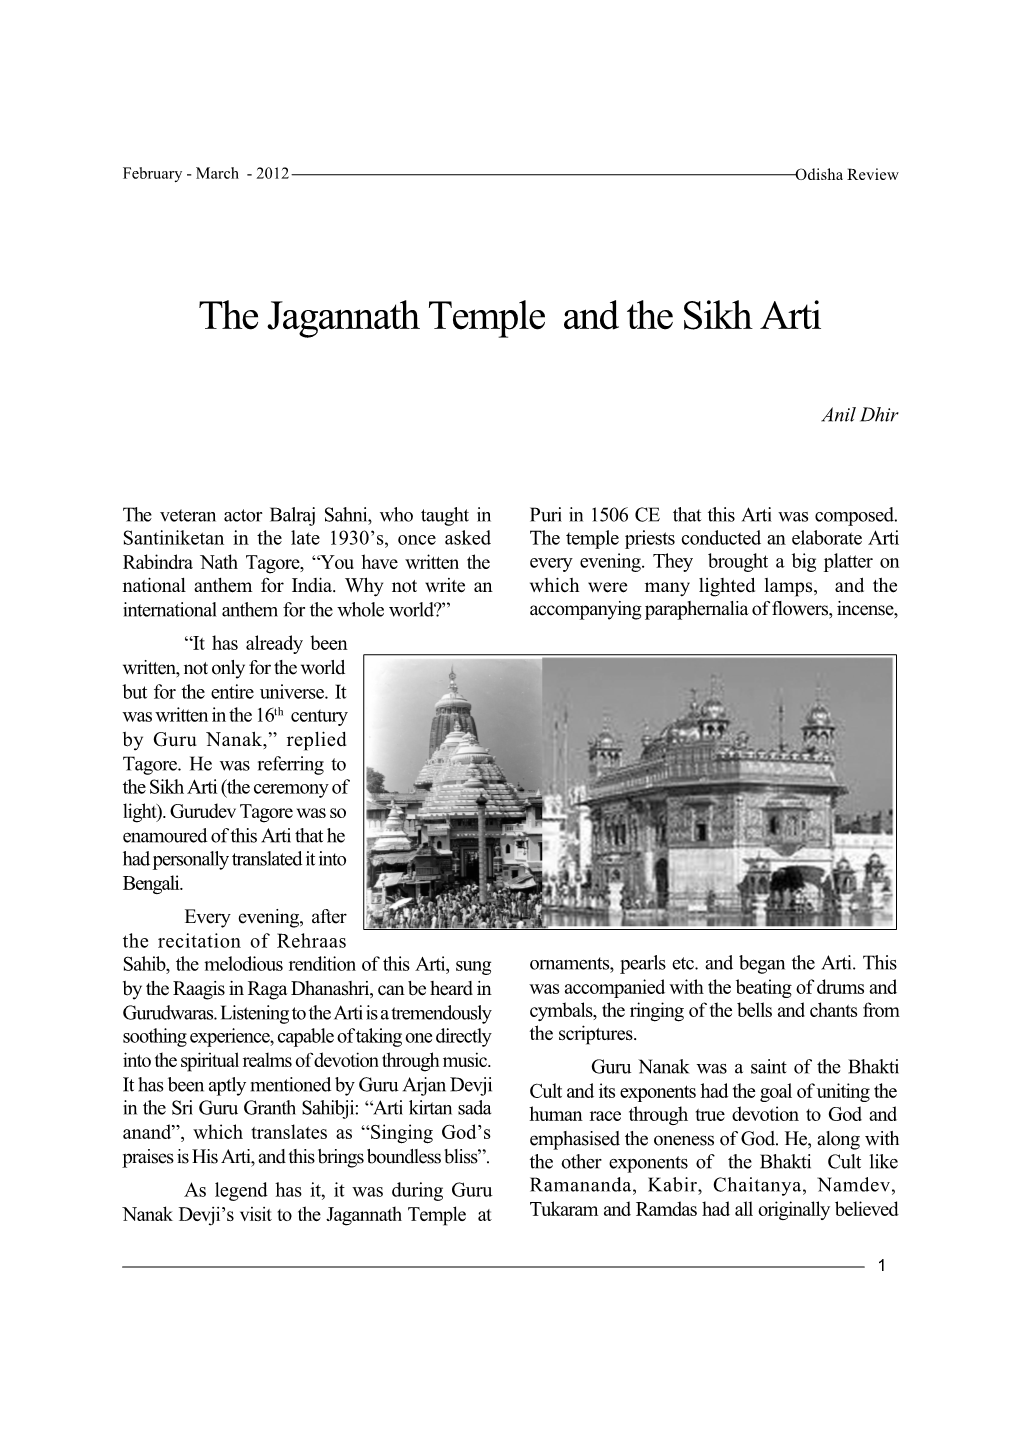 The Jagannath Temple and the Sikh Arti